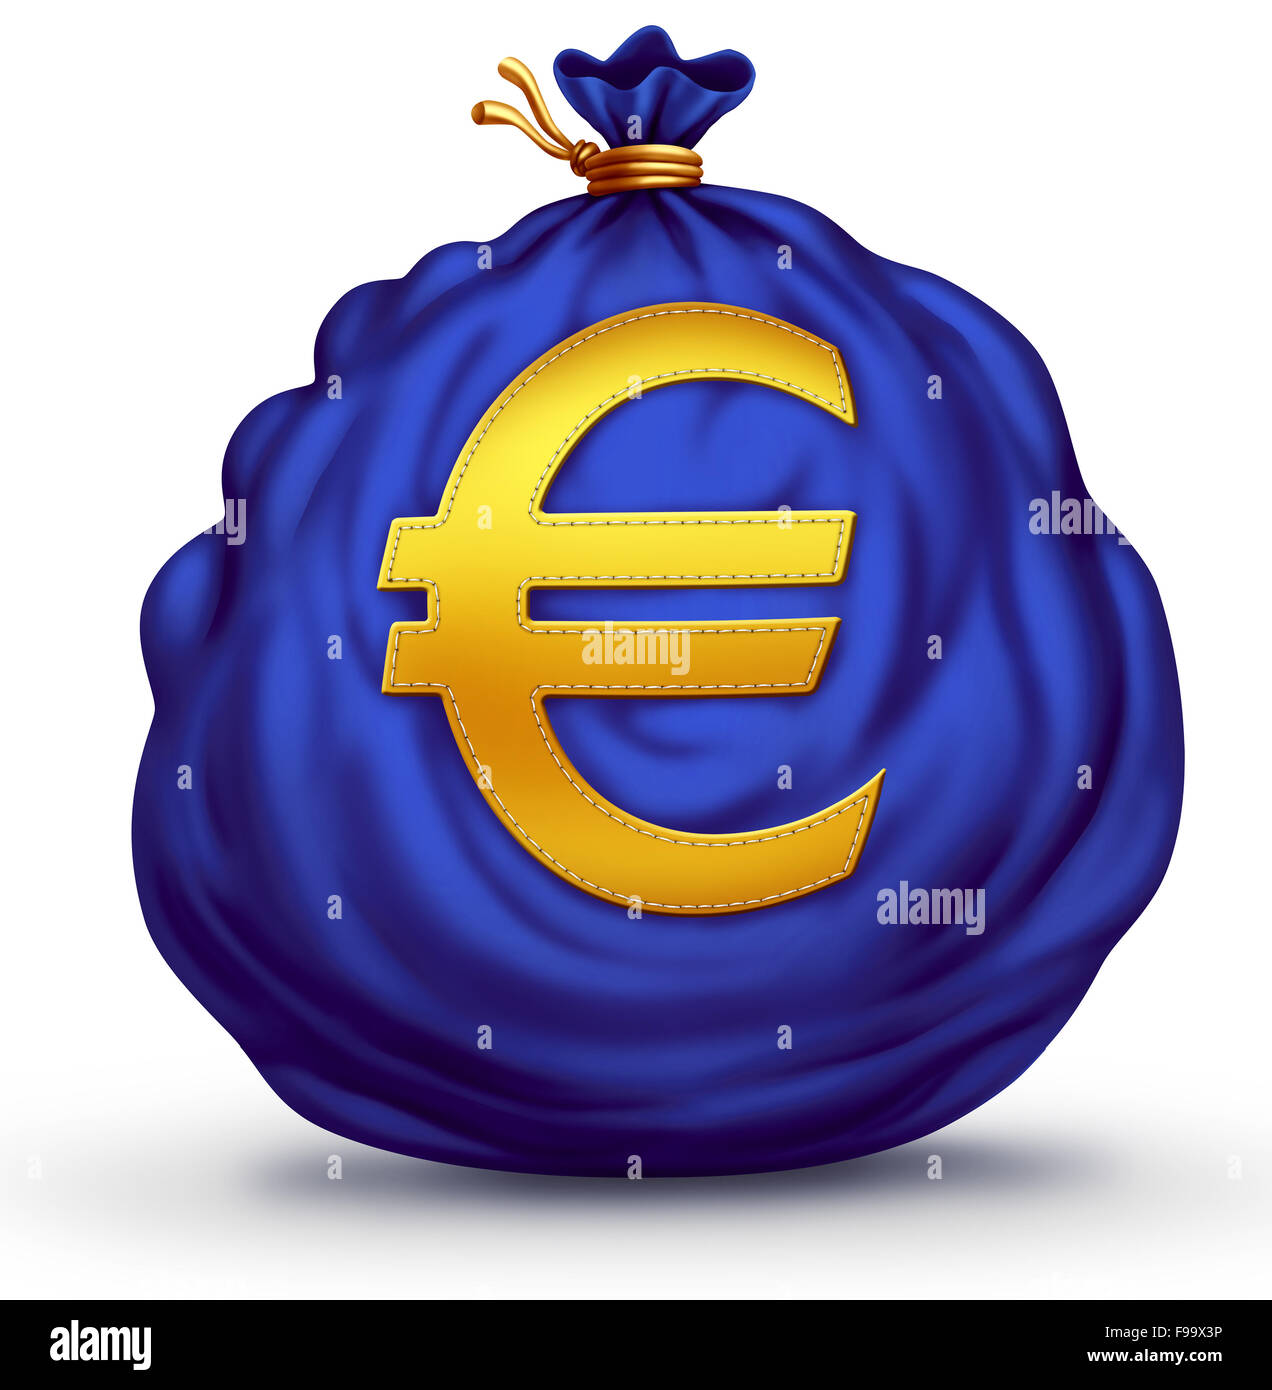 Euro currency bag object as a European financial business symbol as a big blue sack of money with a Europe monetary exchange icon stitched to the finance element on a white background. Stock Photo